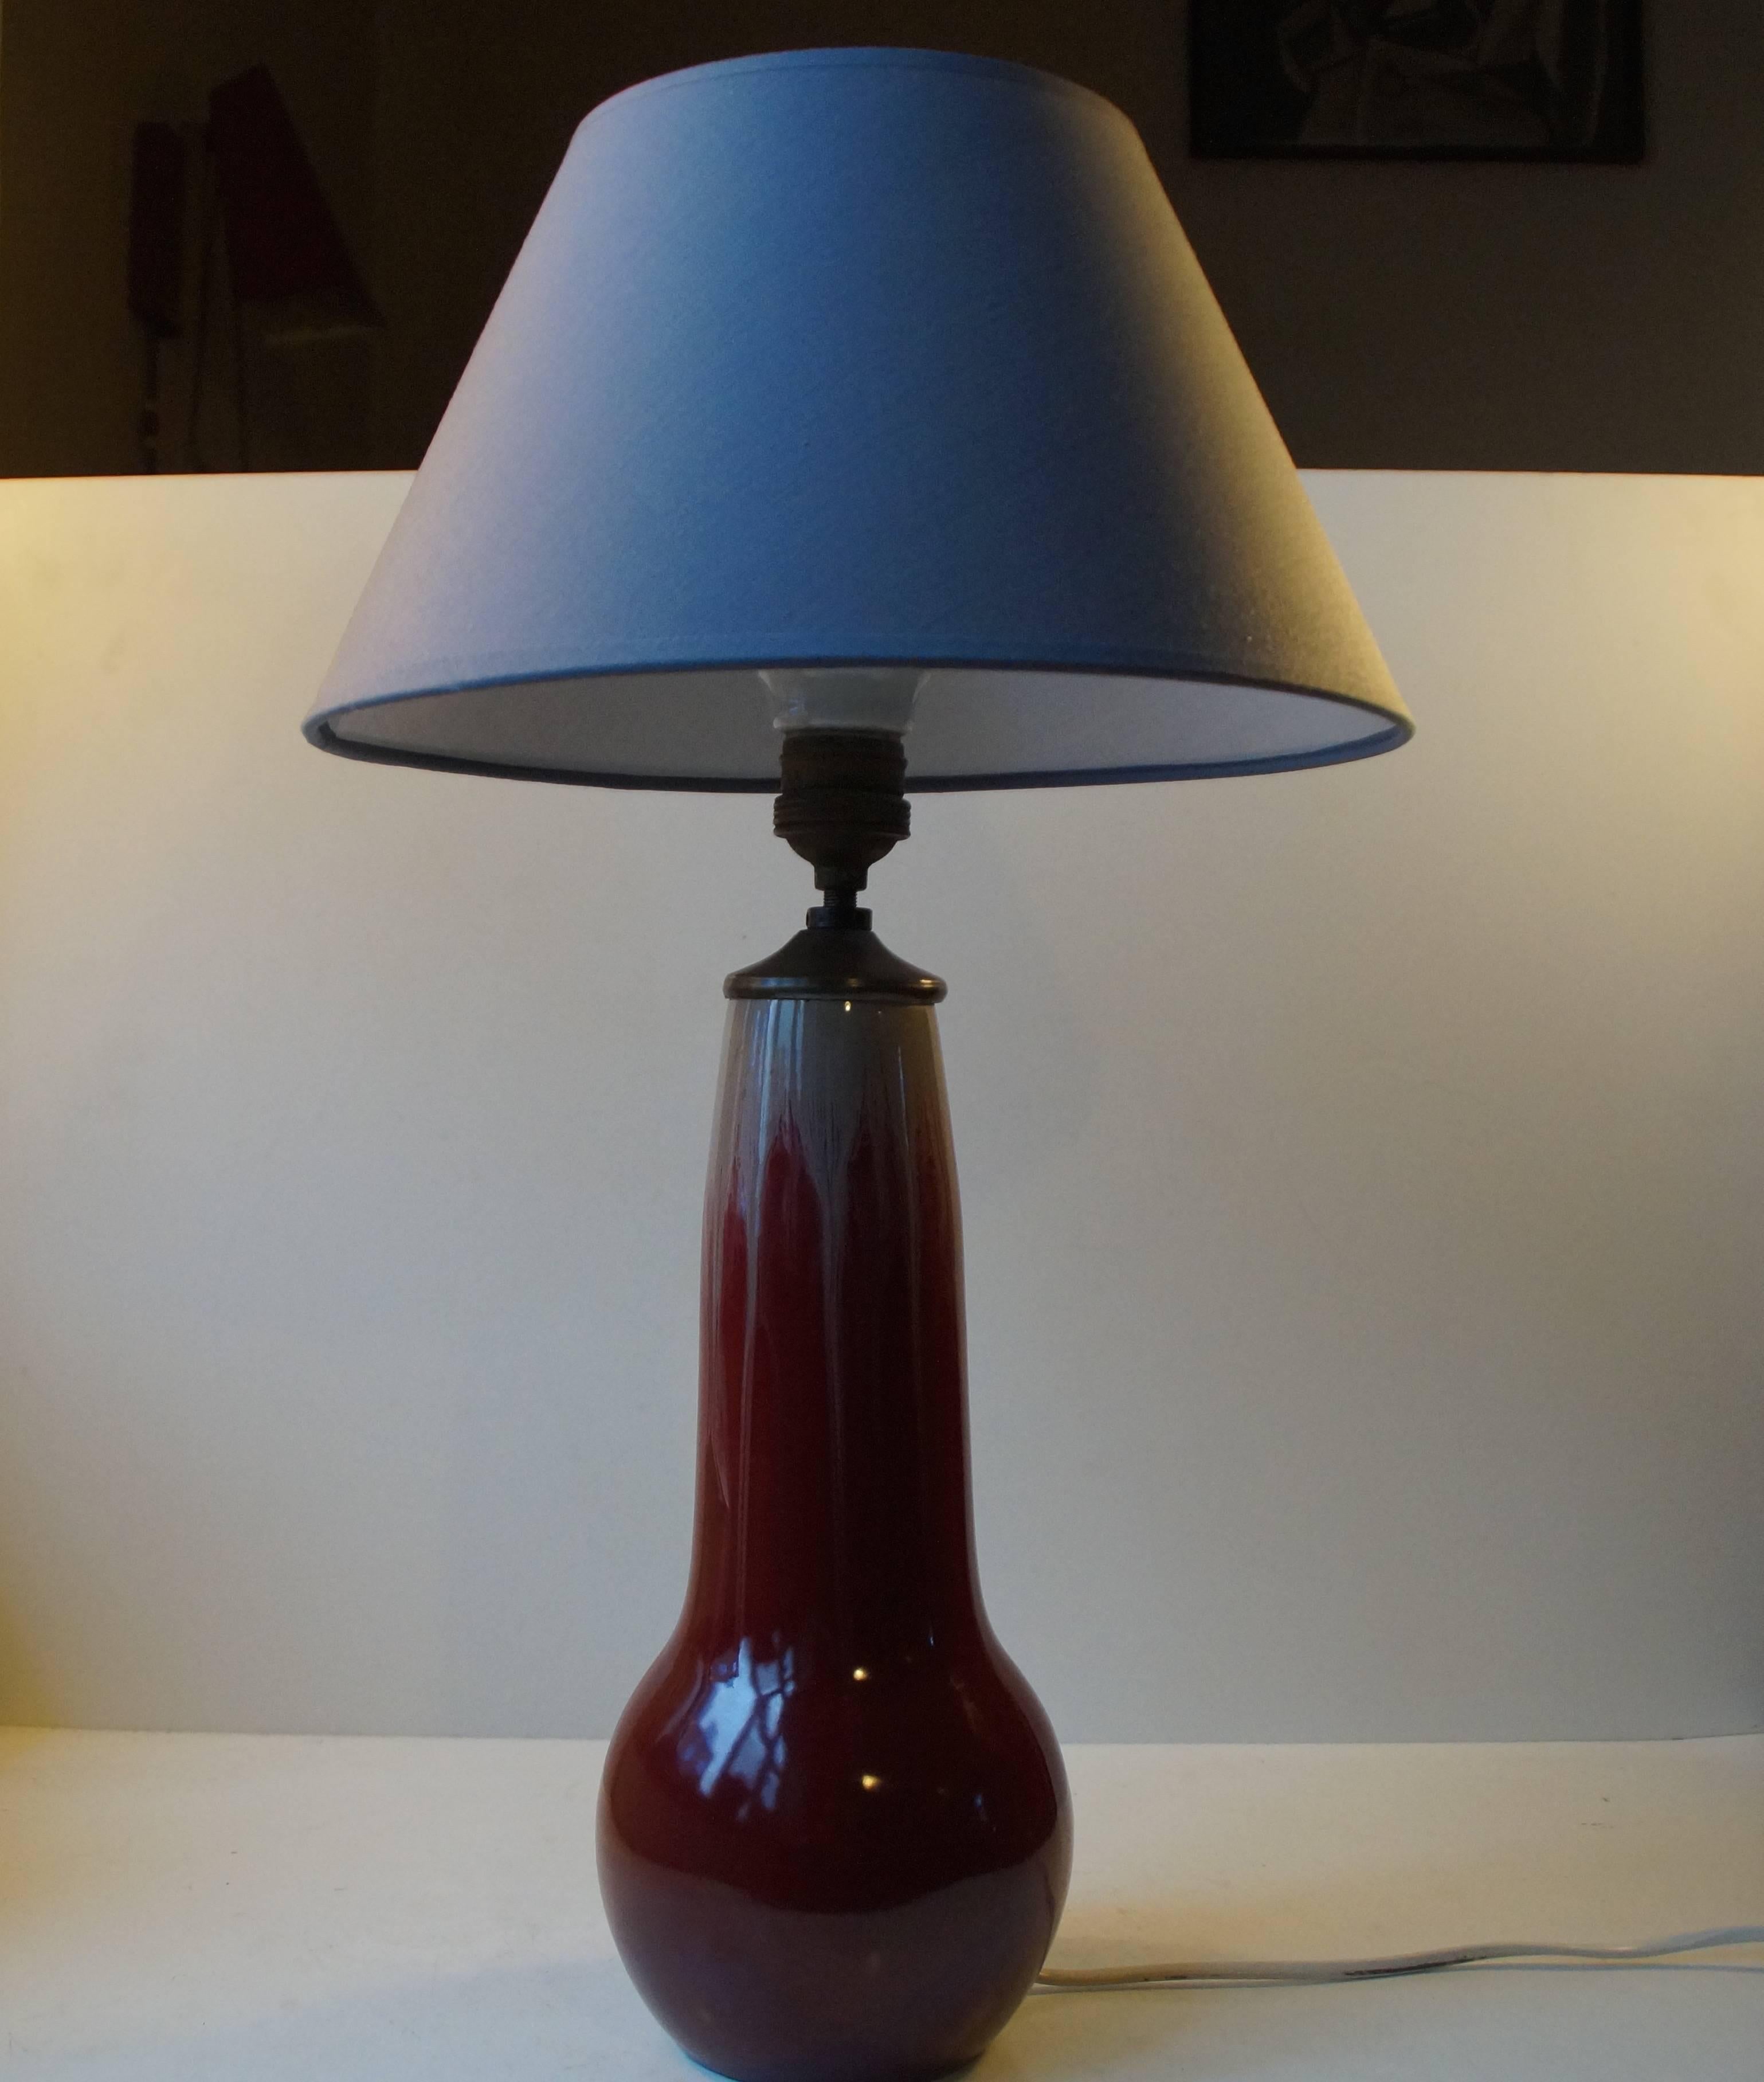 Rare and early Danish modern stoneware table lamp form the 1930s - displaying exceptional techniques in oxblood/sang de boeuf glazes, subtle Jugend/Art Nouveau styling and shape. Michael Andersen's son Daniel won the gold medal at the World's Fair